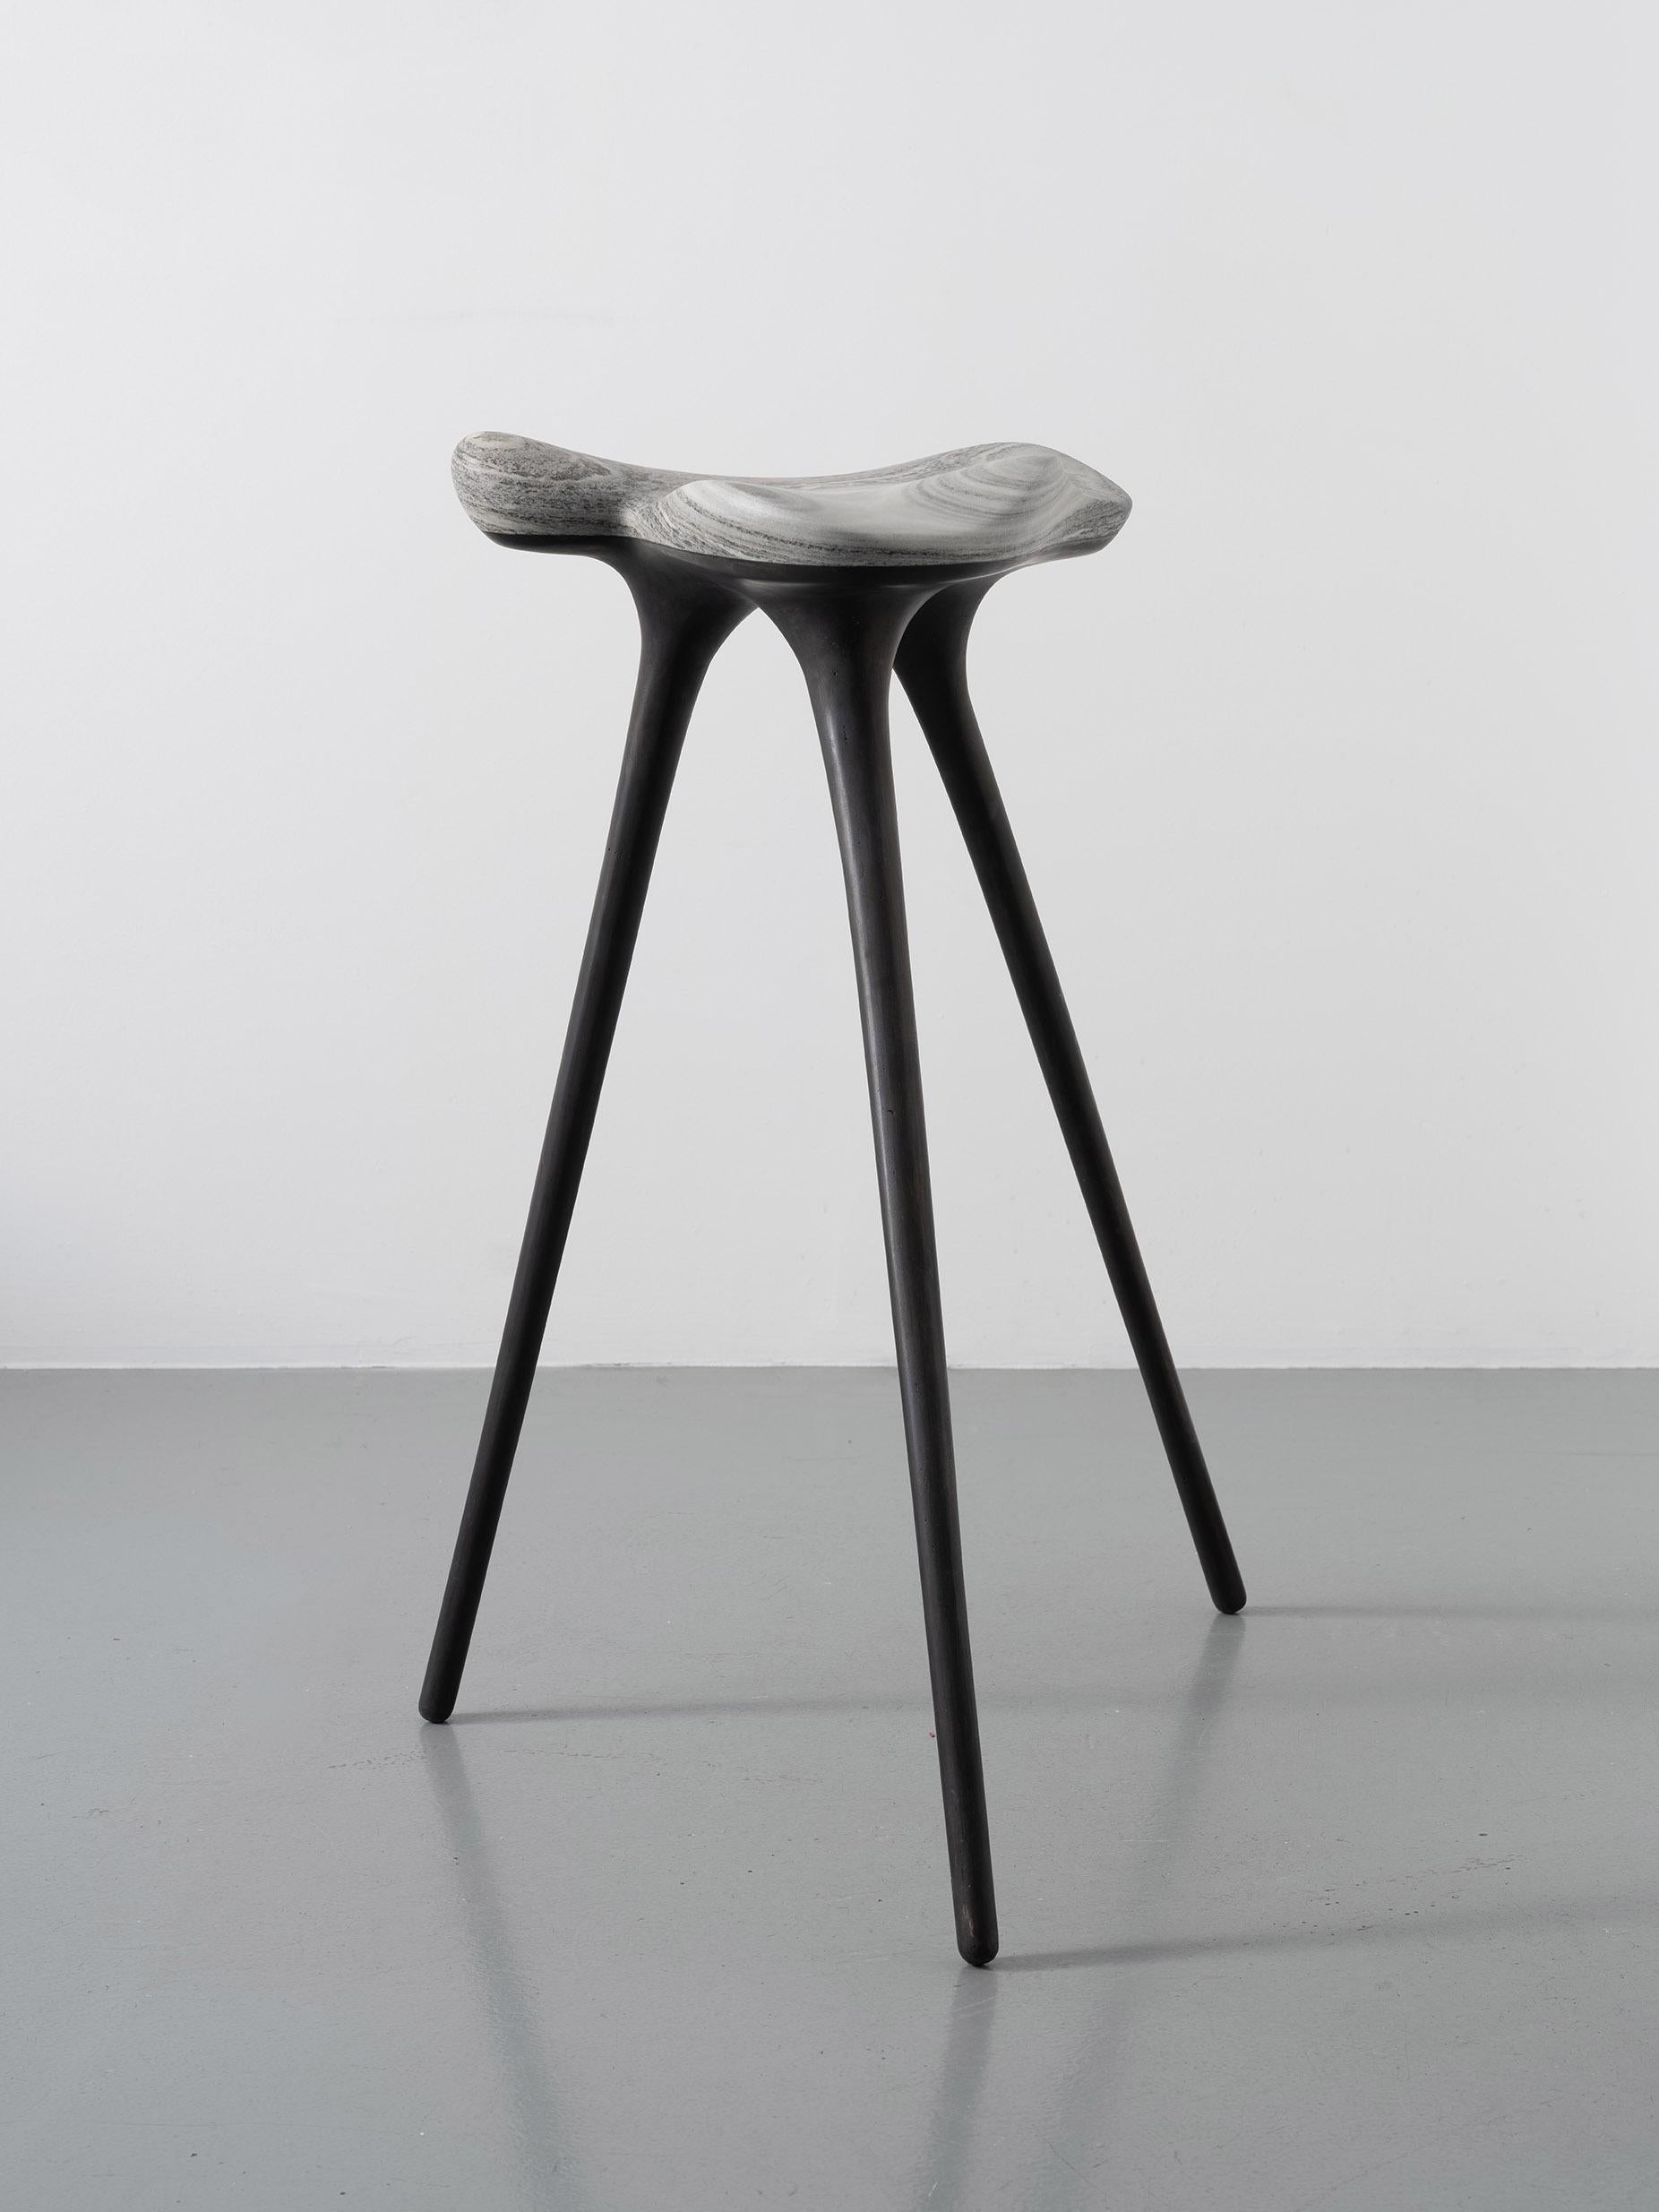 Stephen Shaheen
Nuvola Bar Stool, 2020
Hand-sculpted Vermont marble, cast blackened bronze
33 x 30 x 24 in 
seat 15.5 in diameter.